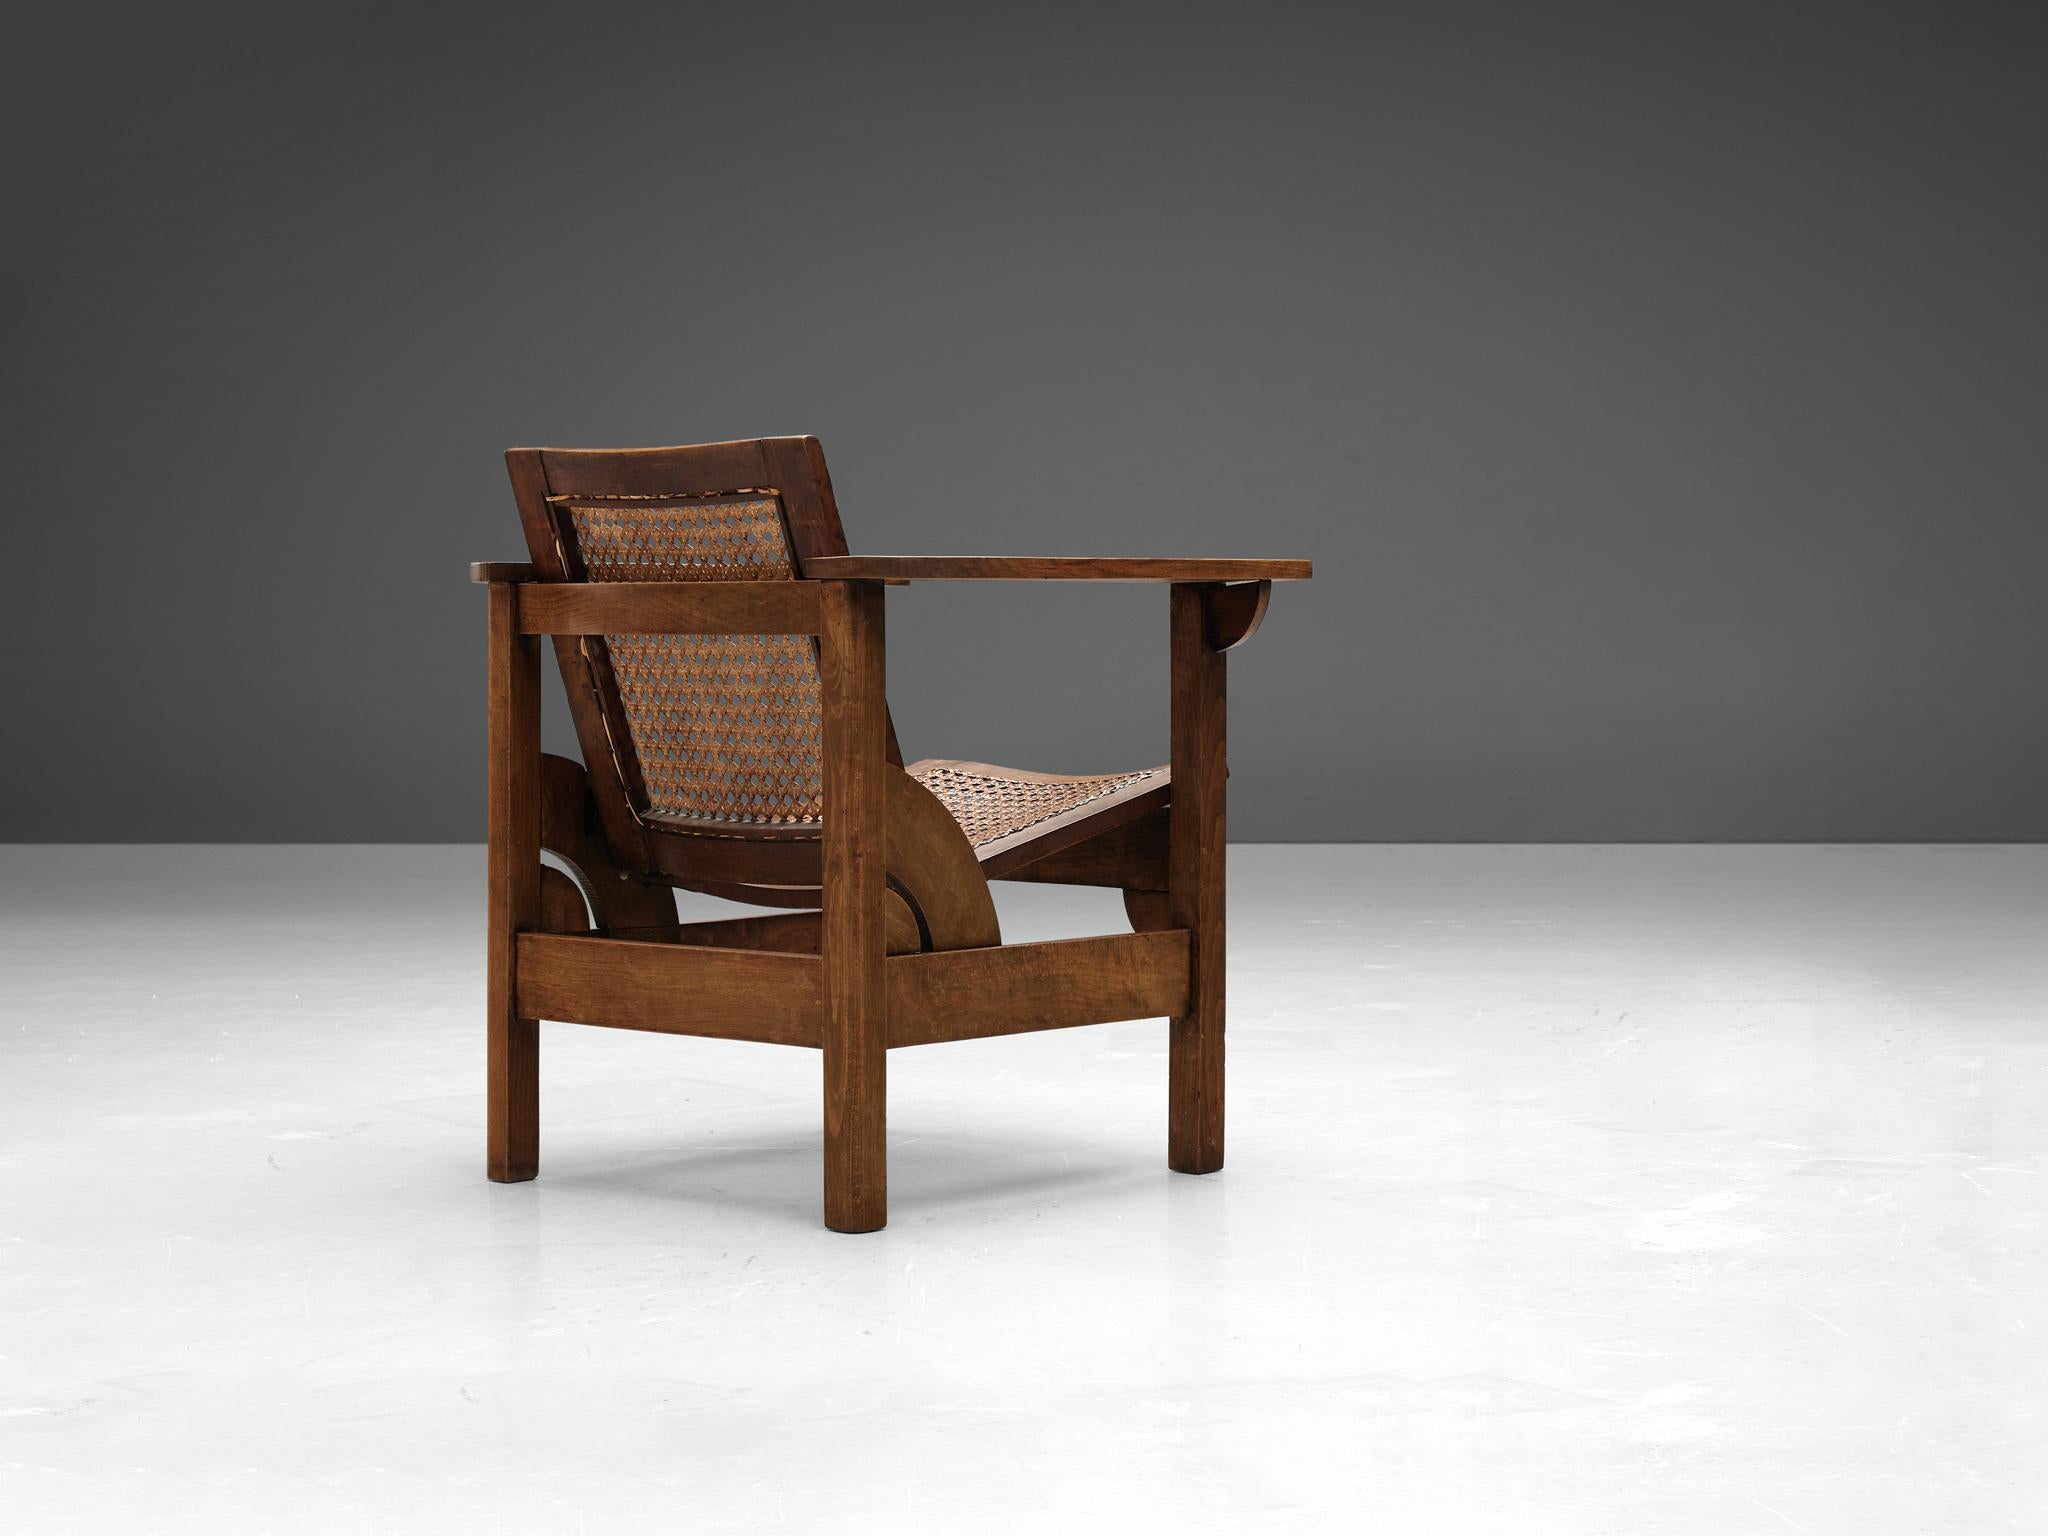 Pierre Dariel, 'Hendaye' armchair, beech, cane, France, 1930s. 

Sturdy Hendaye model lounge chair designed by Pierre Dariel in the 1930s. The wooden framework is executed in beech, whereas the seat and backrest are made of cane. Unique to this